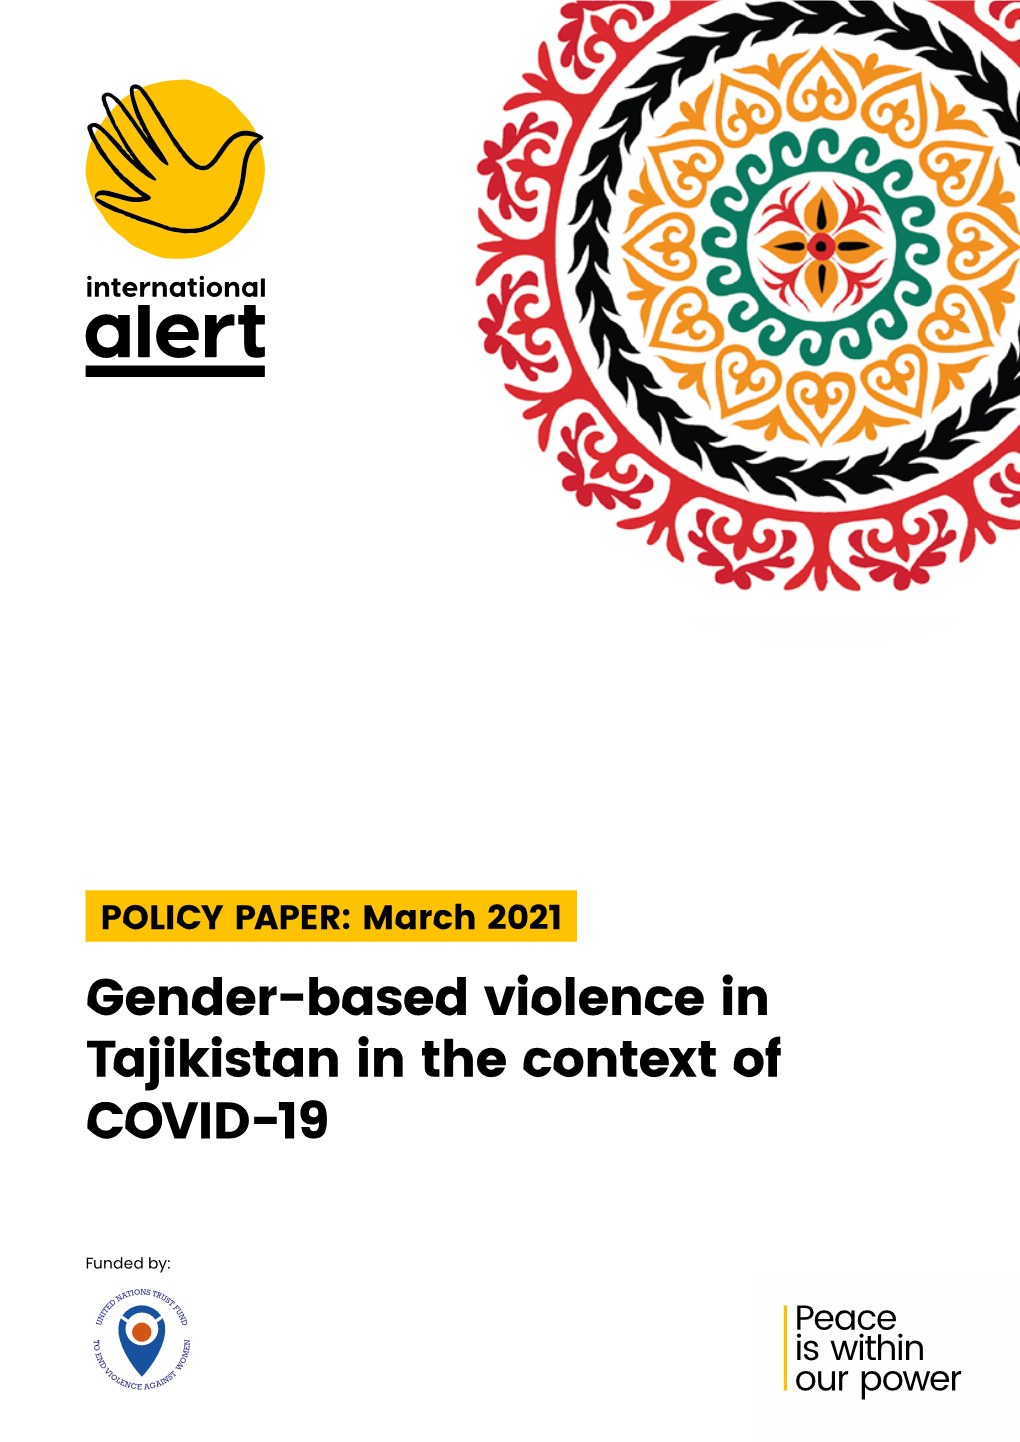 Gender-Based Violence in Tajikistan in the Context of COVID-19